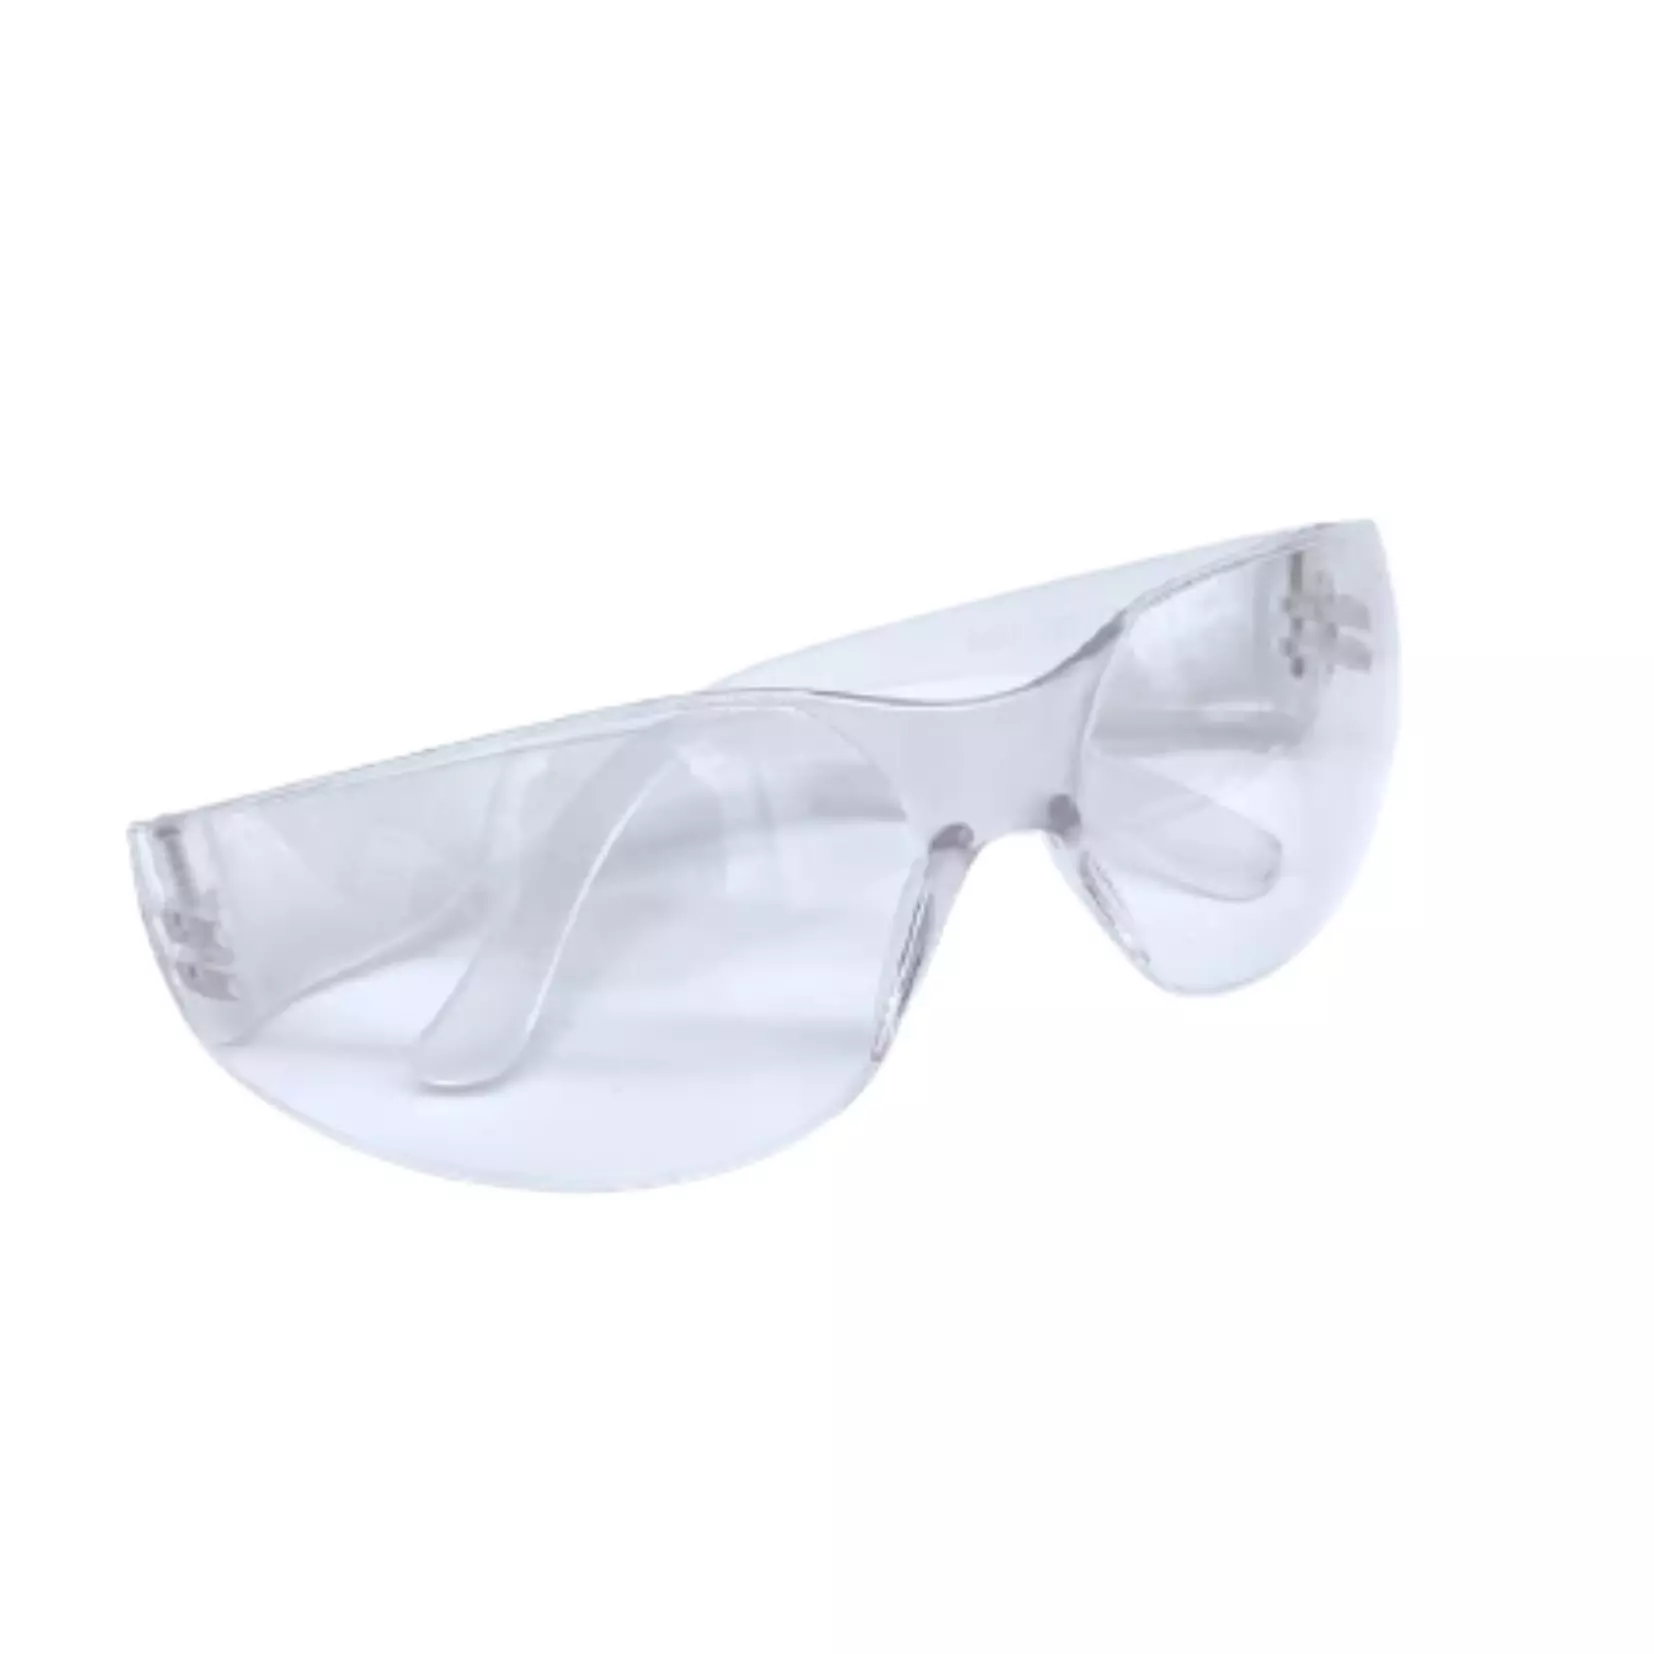 JVT Protective goggles